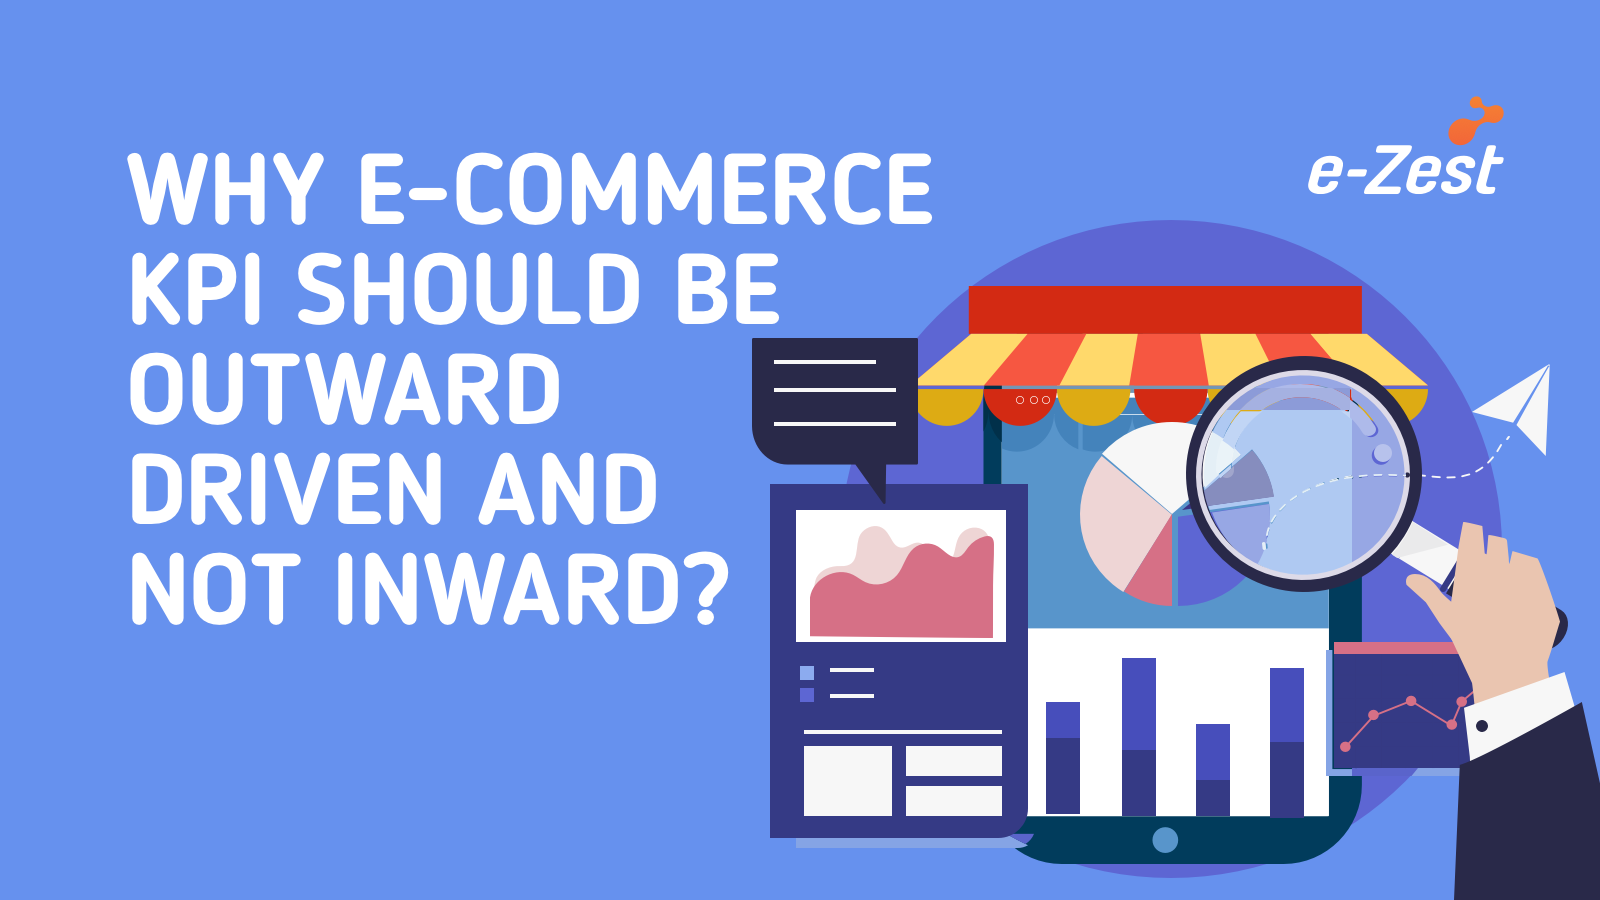 Why e-commerce KPI should be outward driven and not inward?